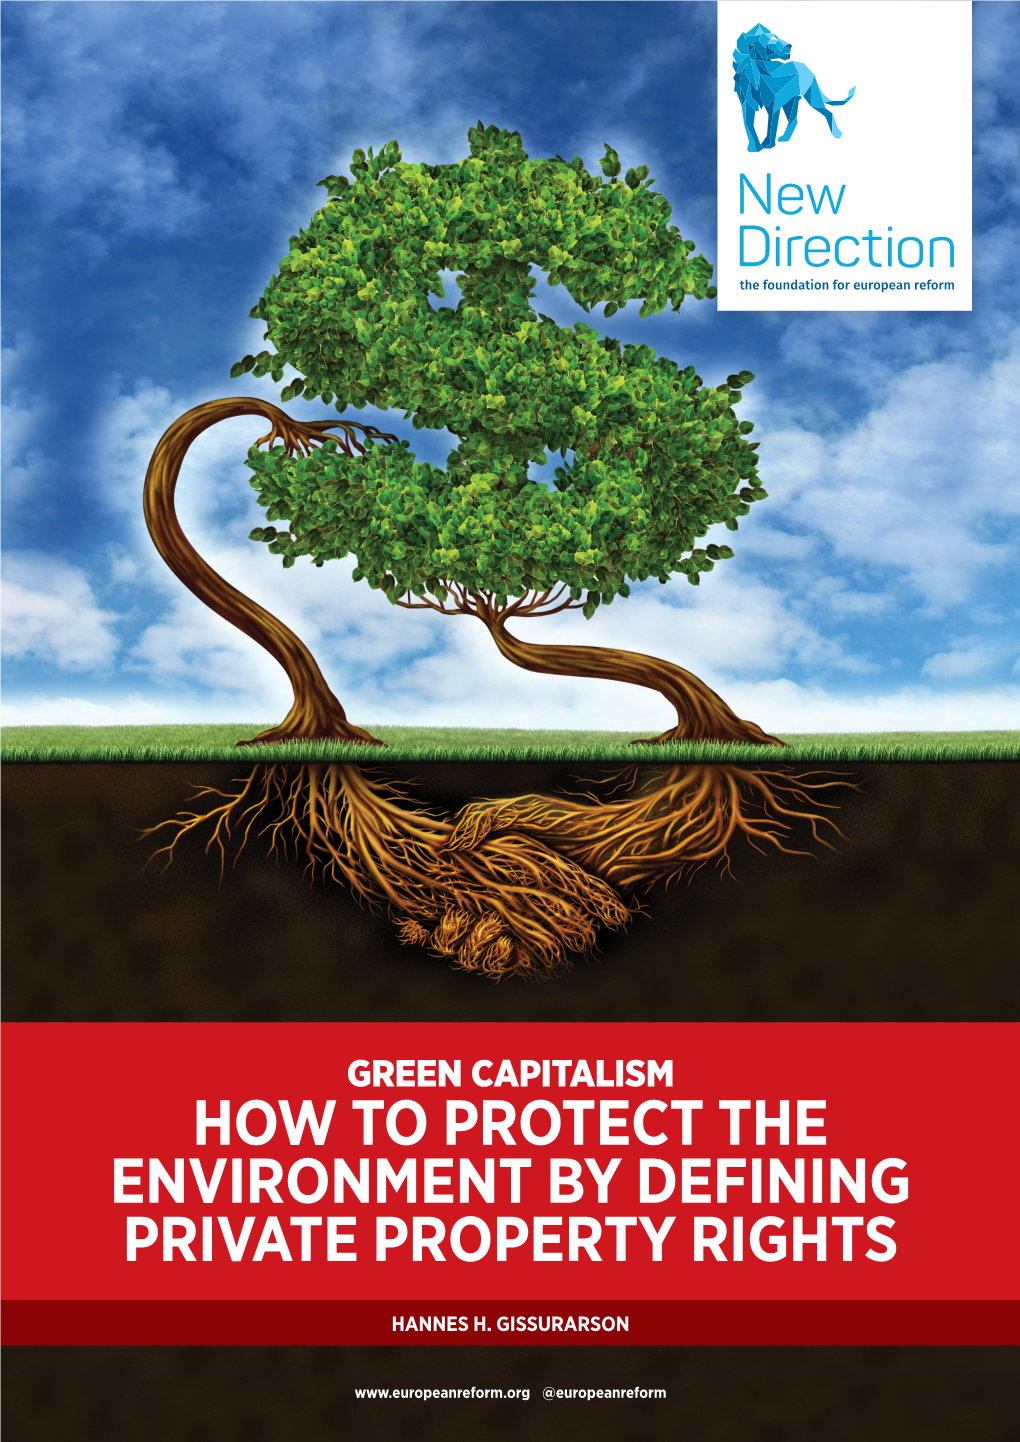 Green Capitalism How to Protect the Environment by Defining Private Property Rights